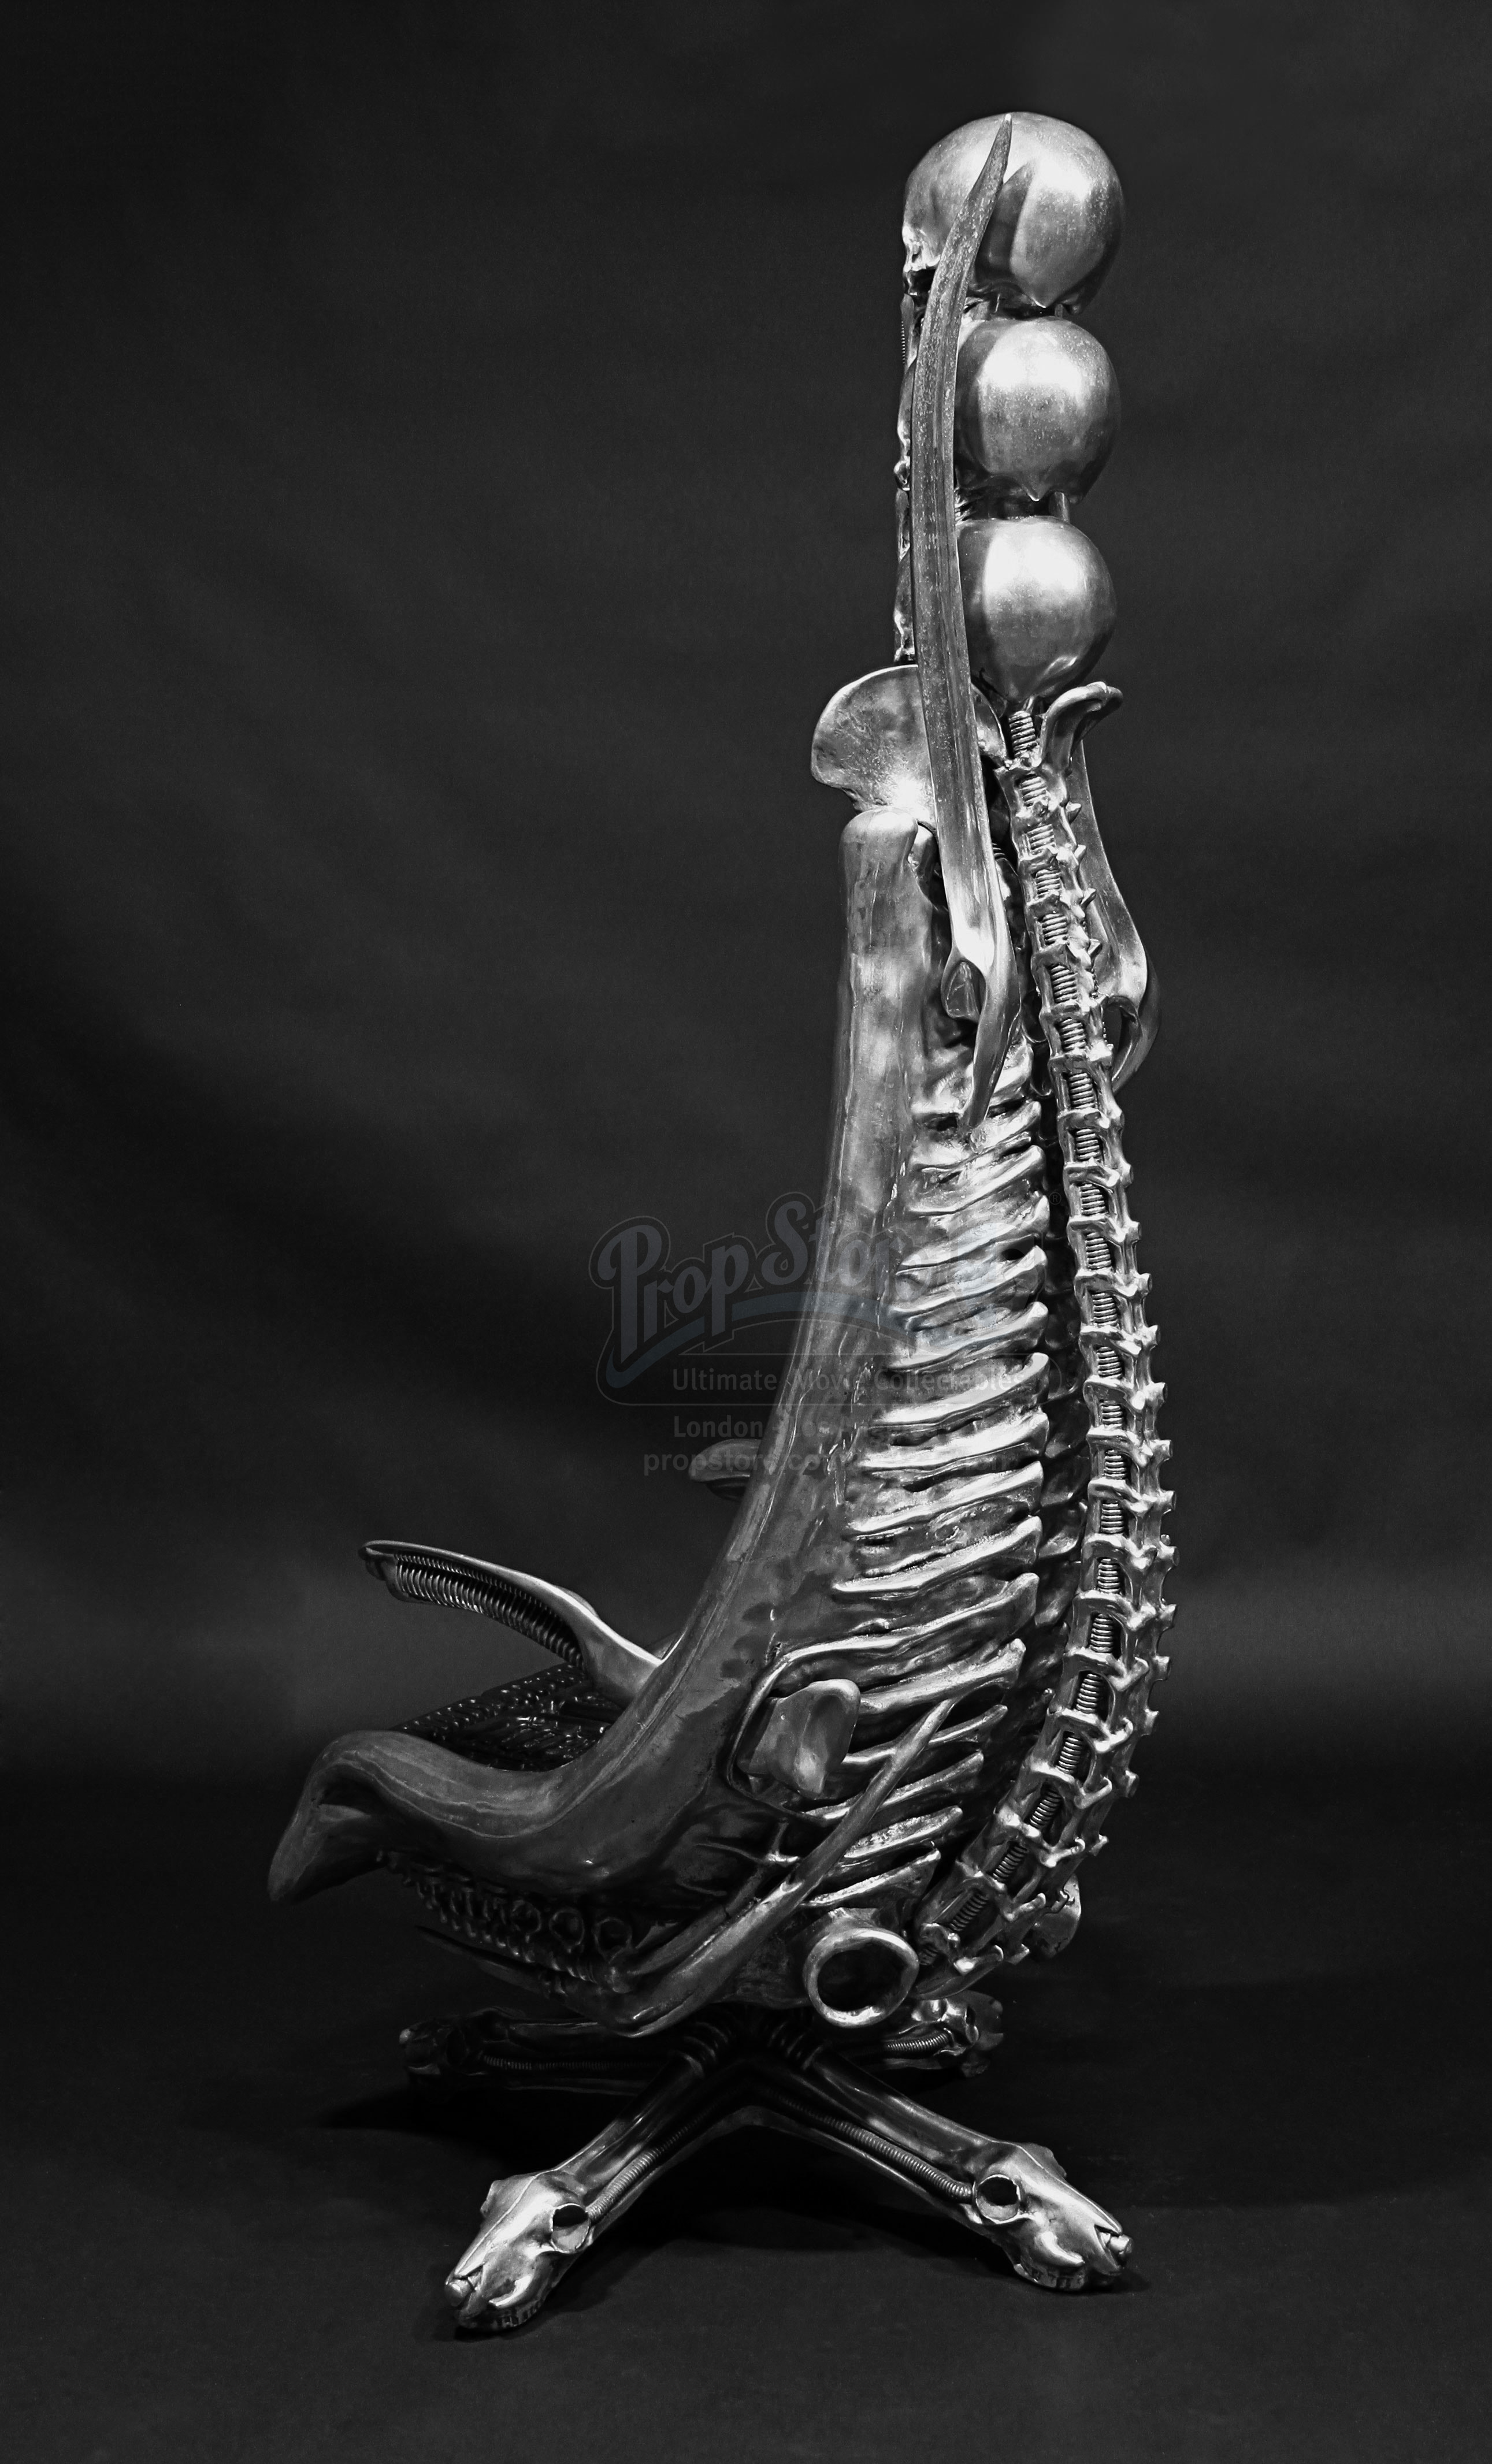 H R Giger Giger Owned Aluminium Harkonnen Capo Chair